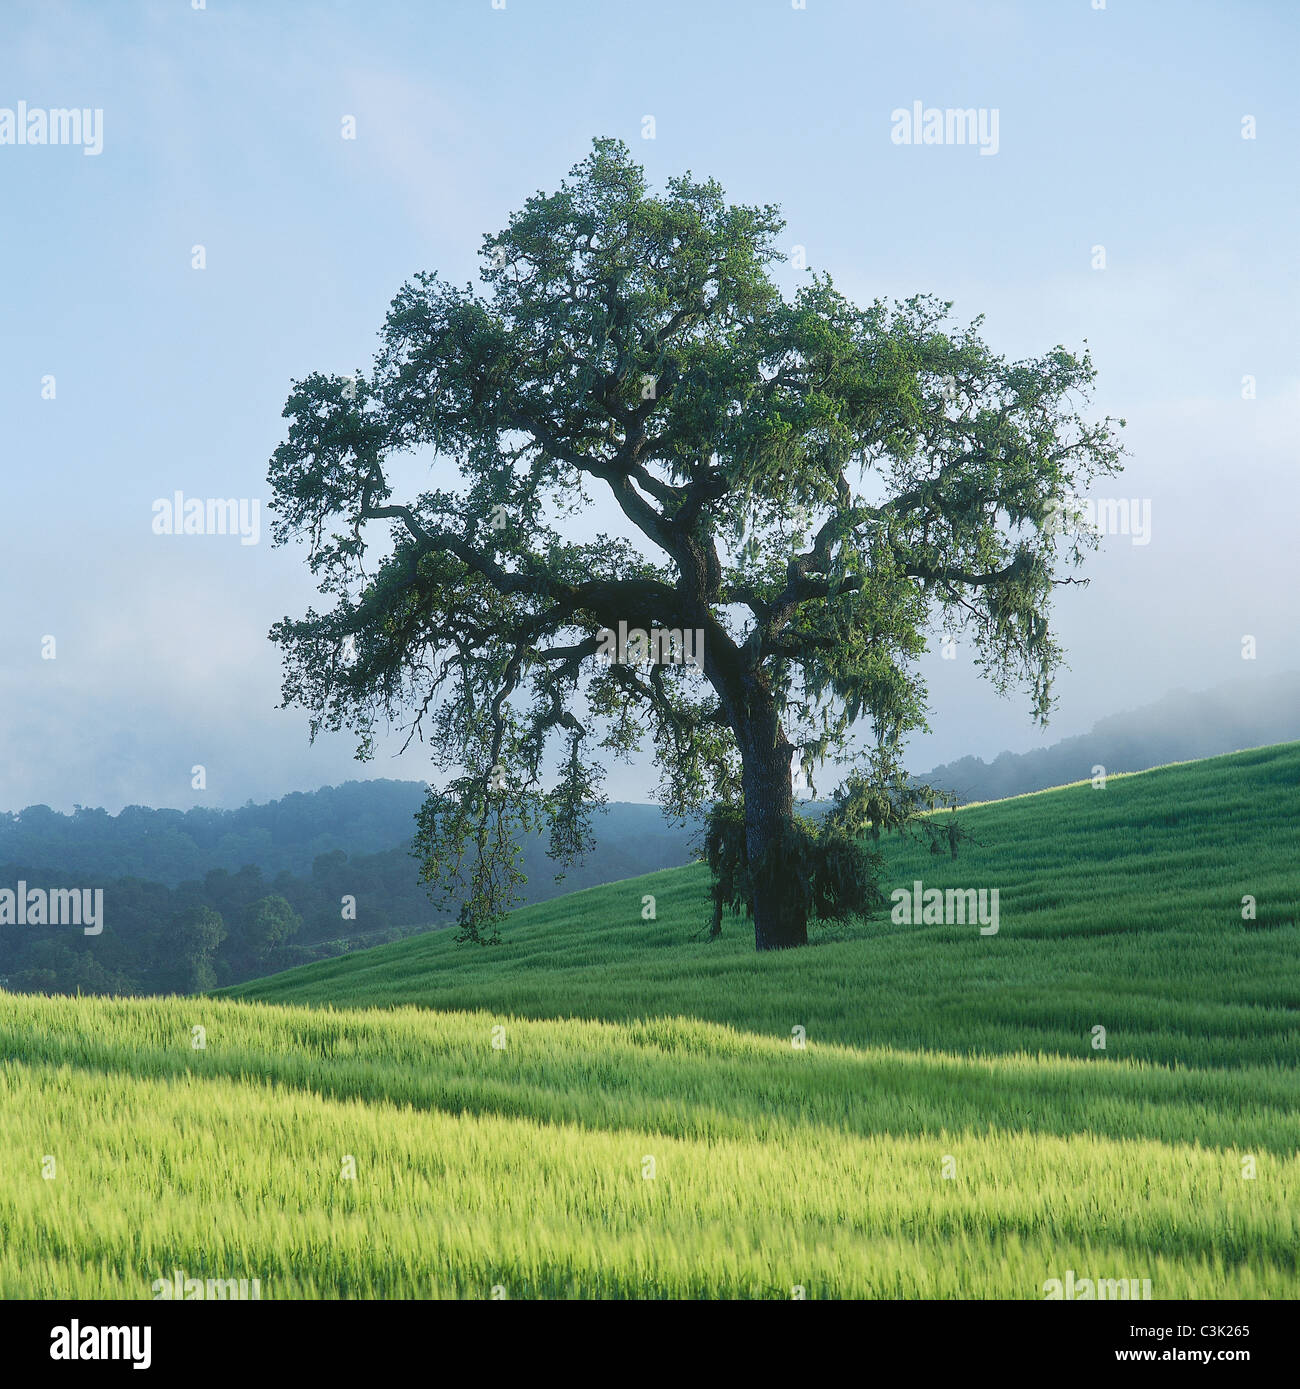 USA, California, View of deciduous tree with mountains in background Stock Photo